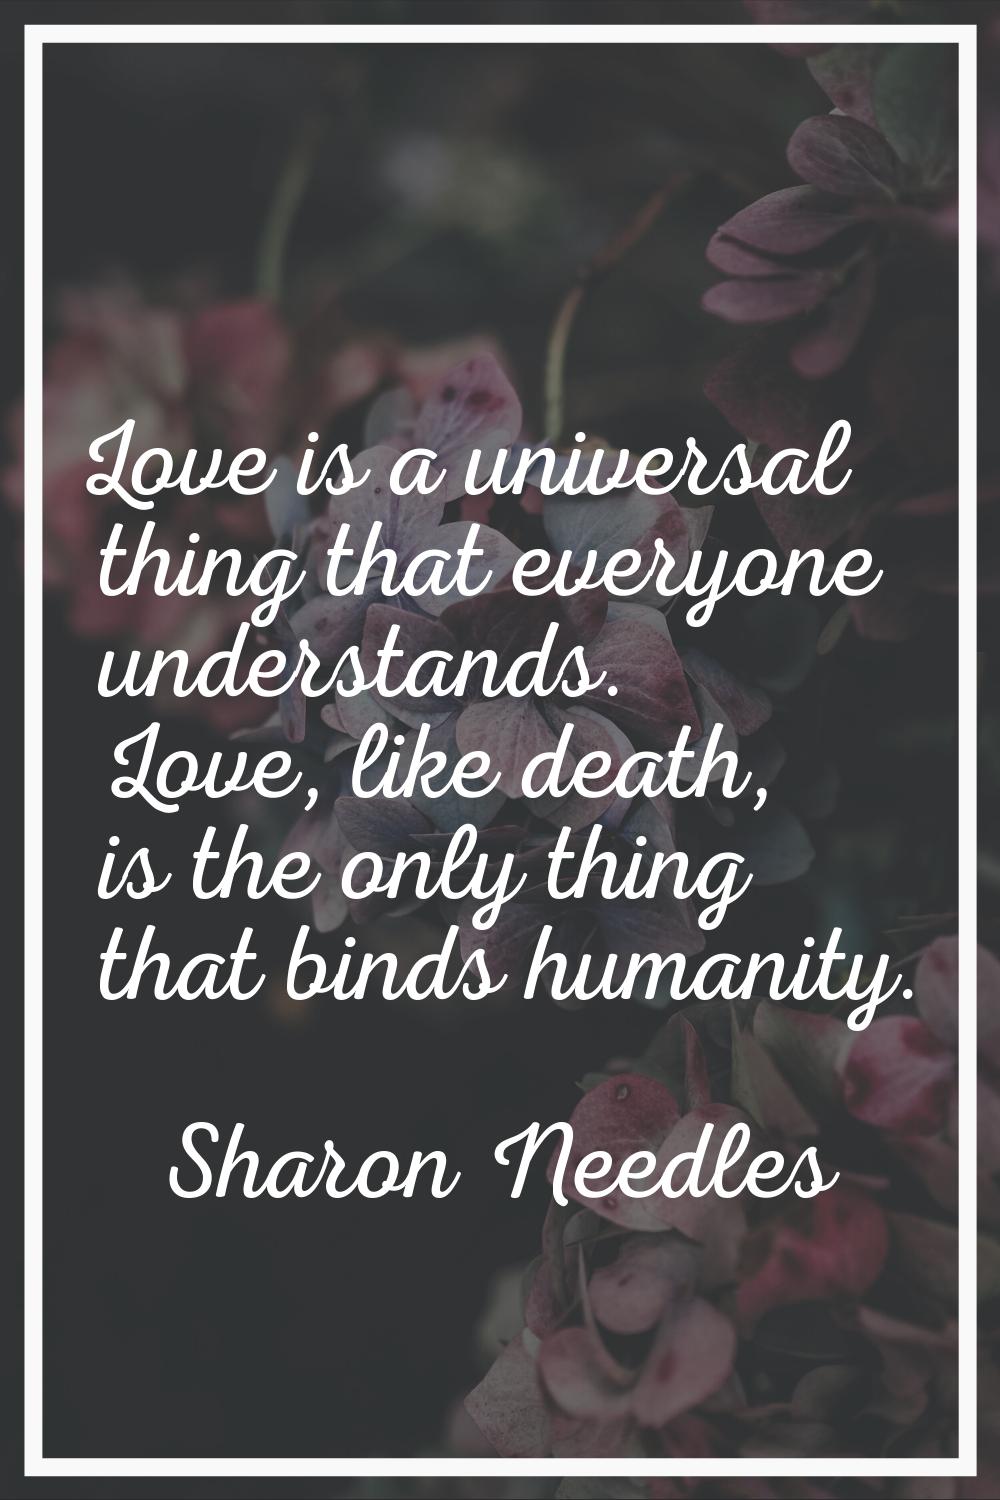 Love is a universal thing that everyone understands. Love, like death, is the only thing that binds